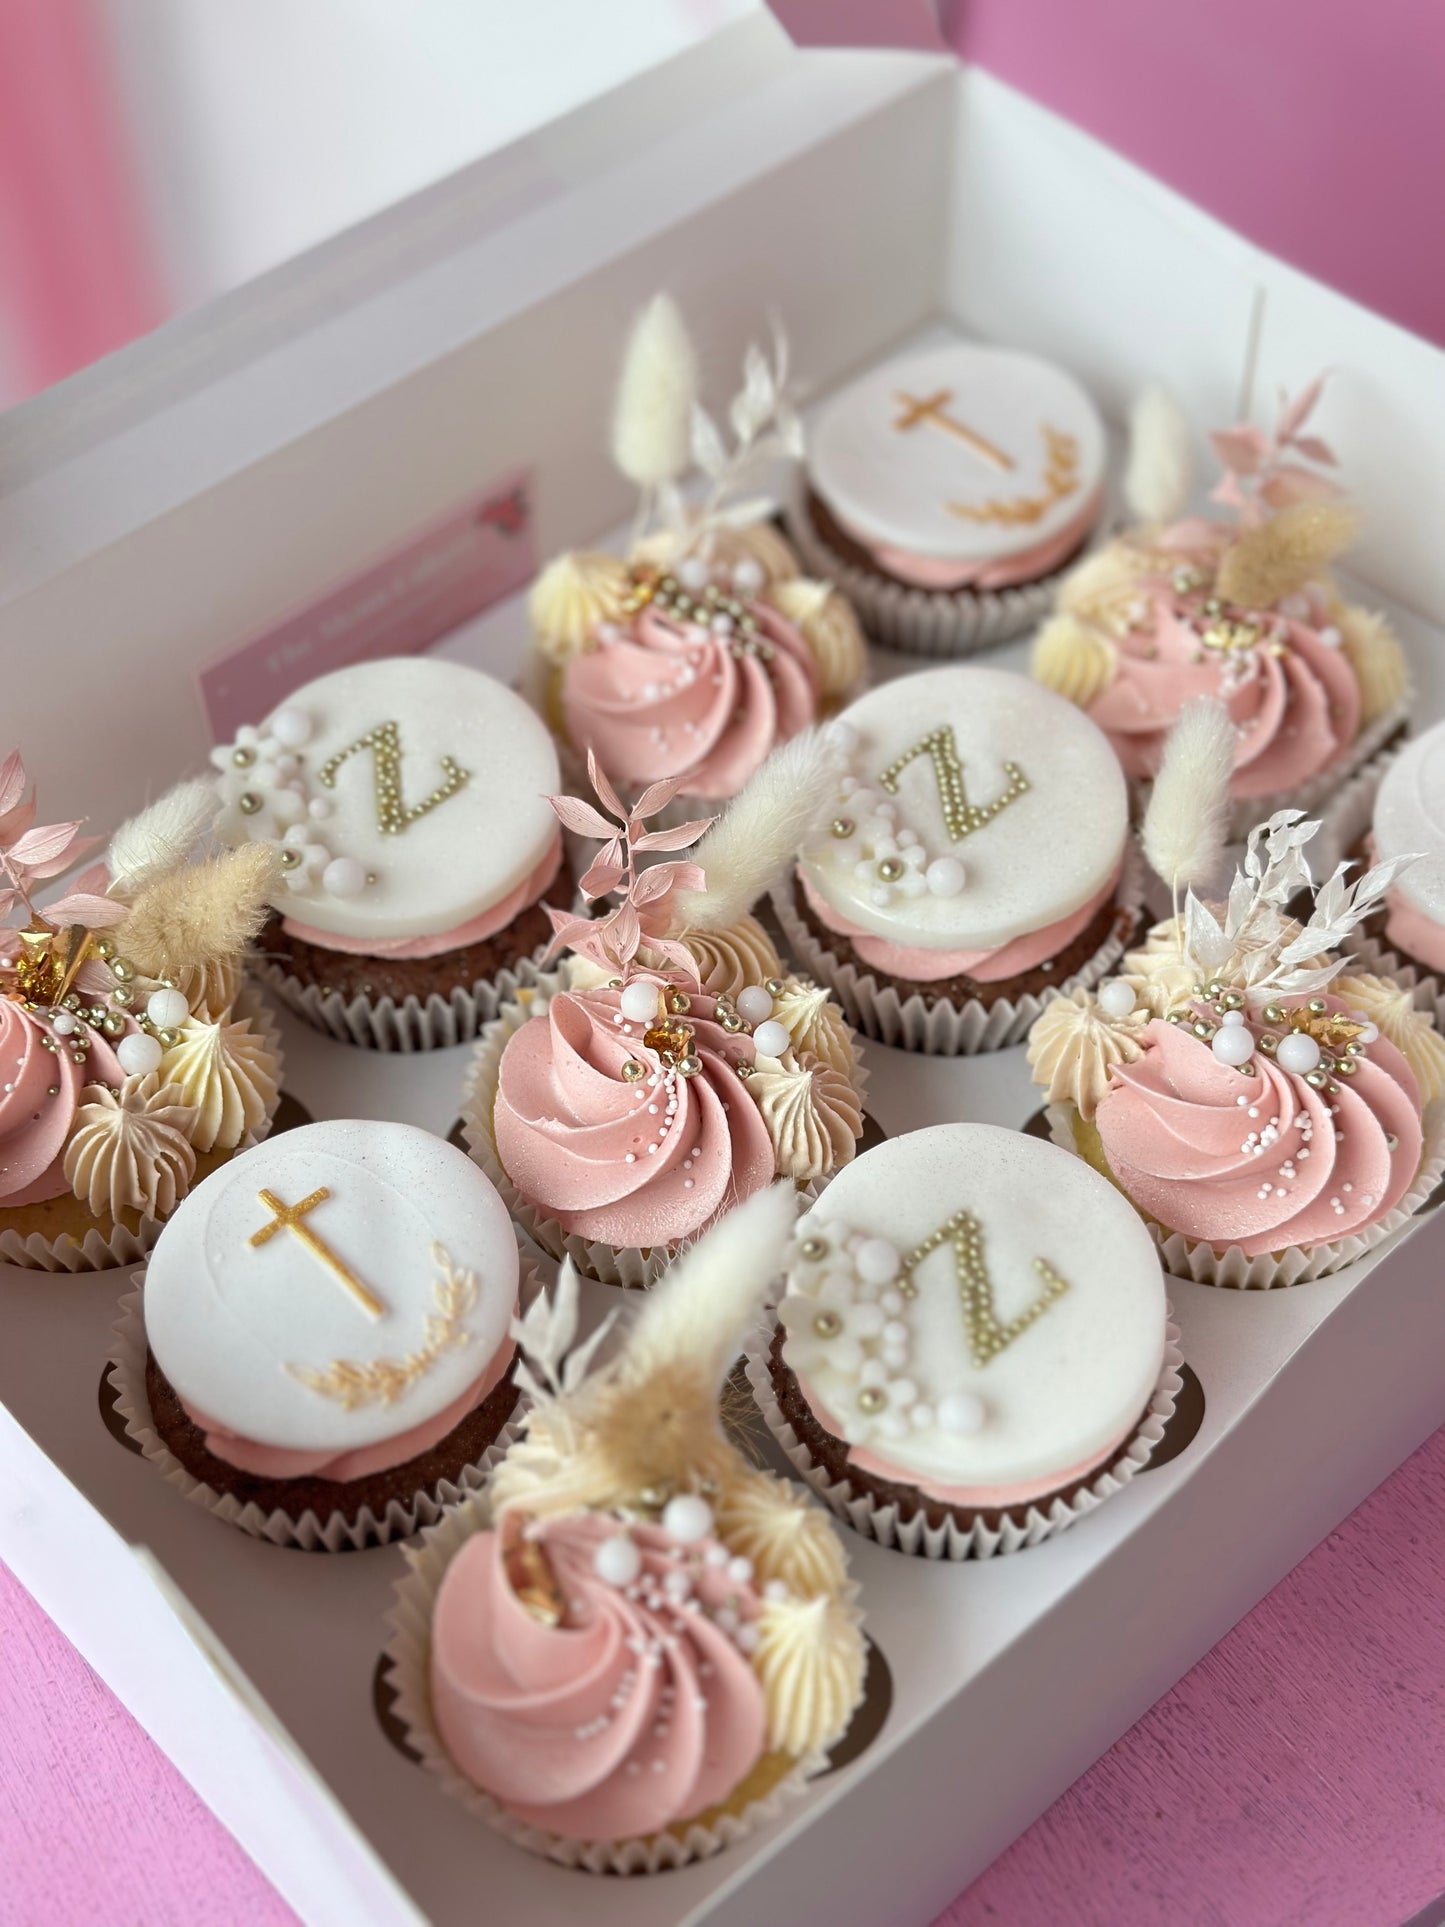 Boujee Christening Cupcakes - Communion - Confirmation - Christening